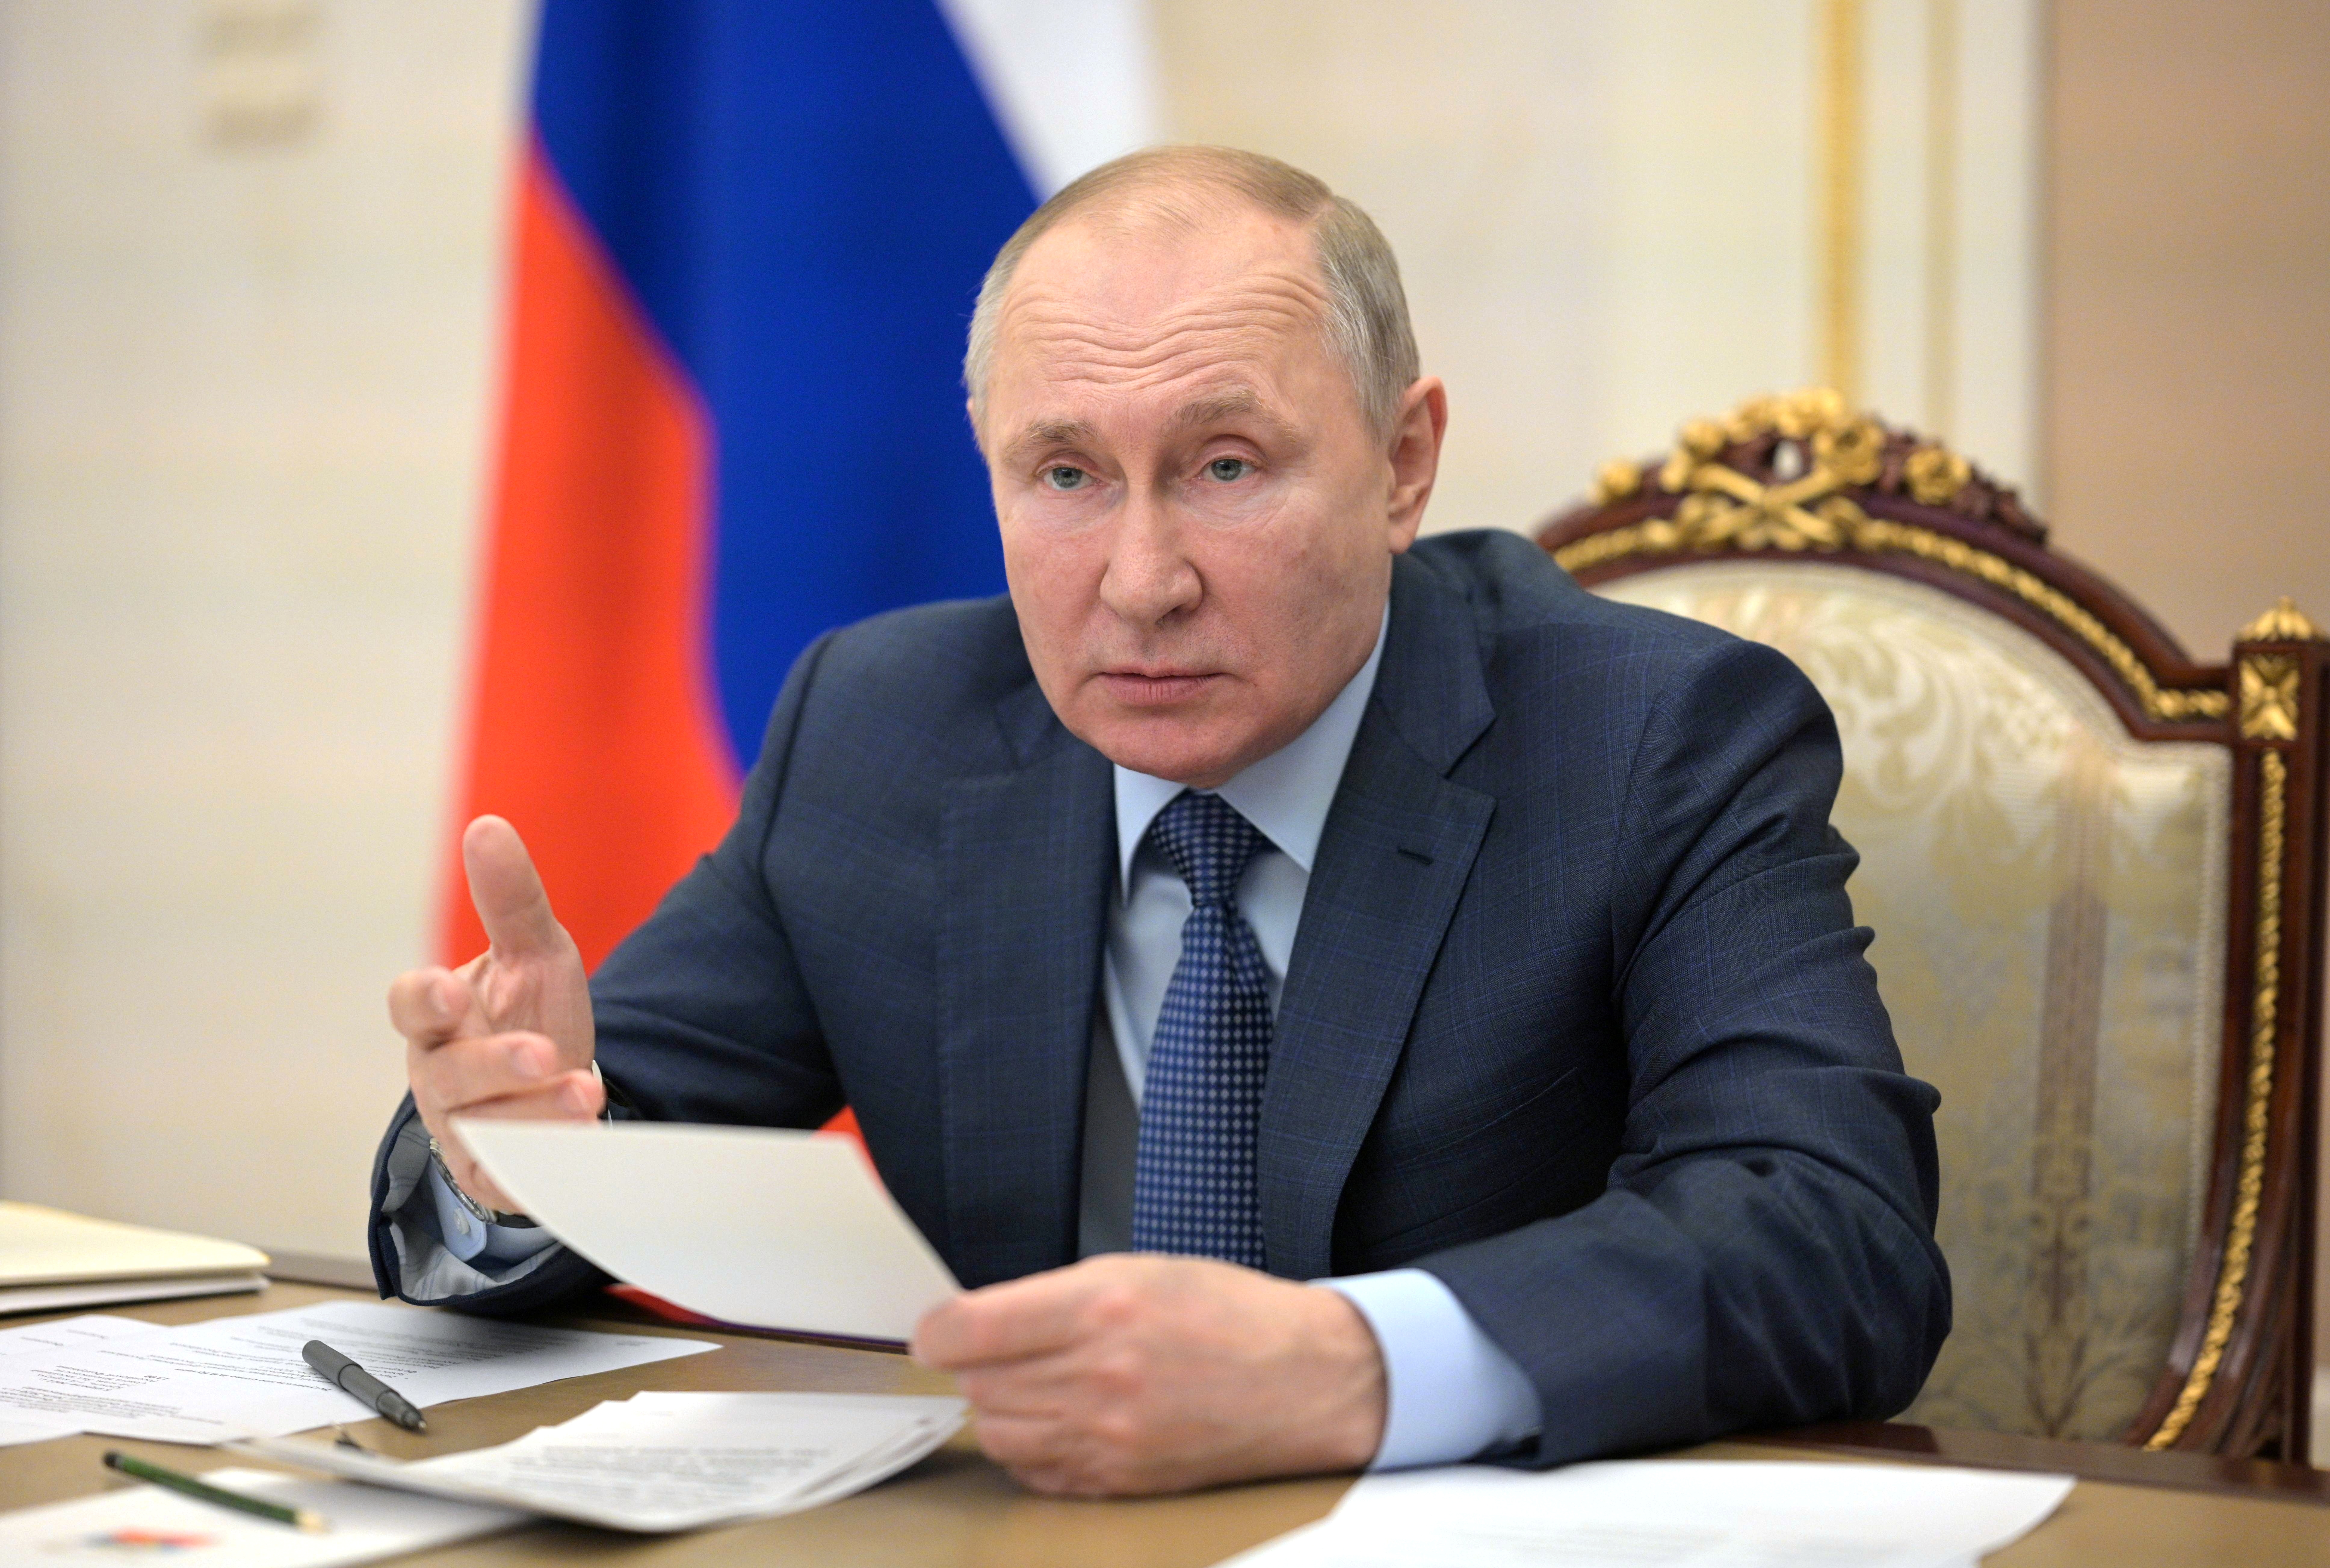 Russian President Putin chairs a meeting with senior members of the government in Moscow